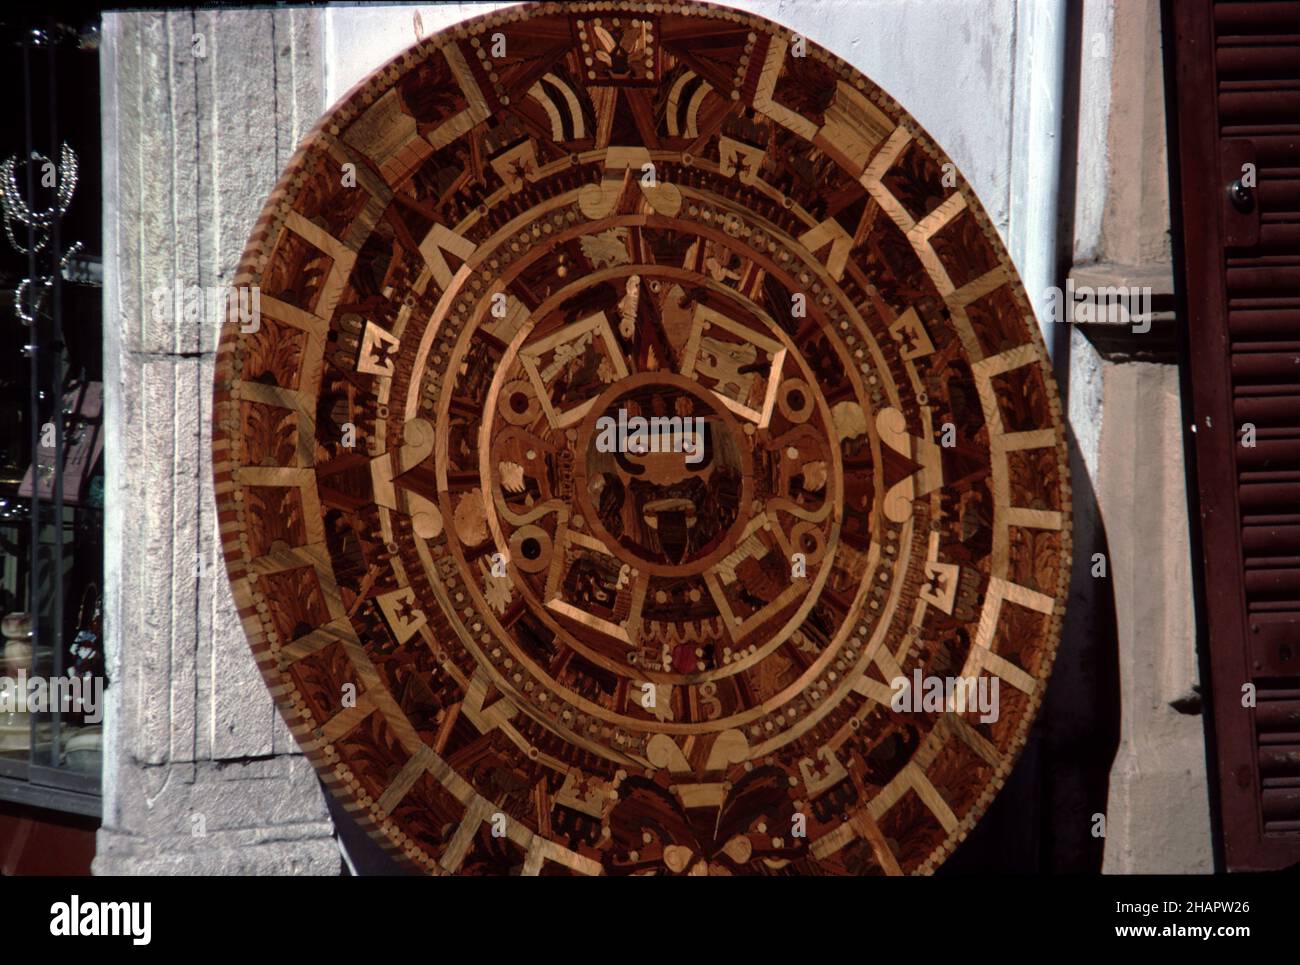 Merida, Yucatan, Mexico. 12/30/1985. Aztec Sunstone calendar.  Crafted in mosaic wood.  Original stone calendar carved in basalt on display at the NATIONAL ANTHROPOLOGY MUSEUM in Mexico City.  Original stone calendar carved circa 1502-1520 AD. Stock Photo